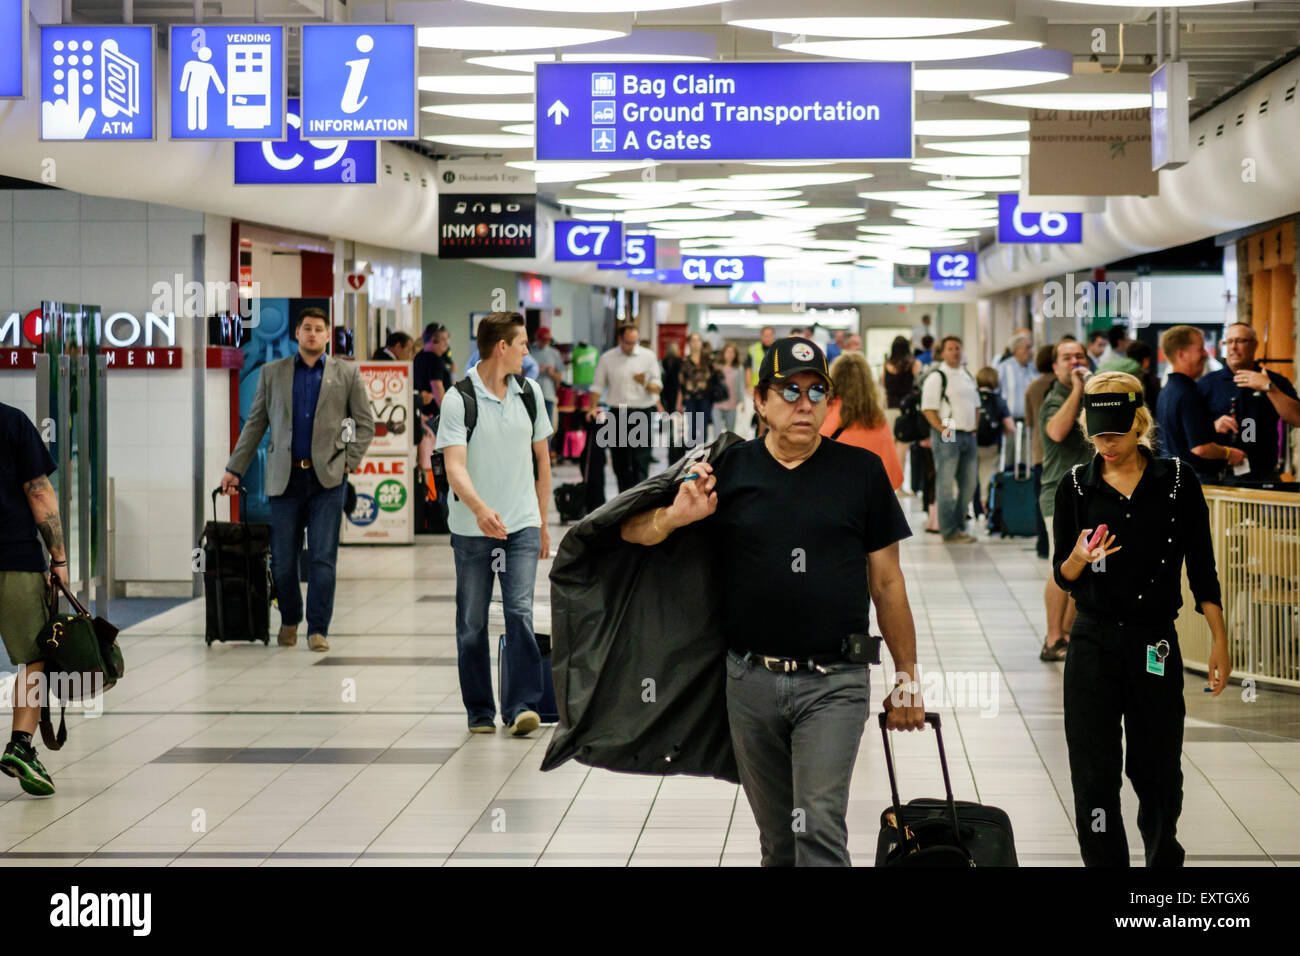 Baggage Claim Sign Stock Photos & Baggage Claim Sign Stock Images - Alamy